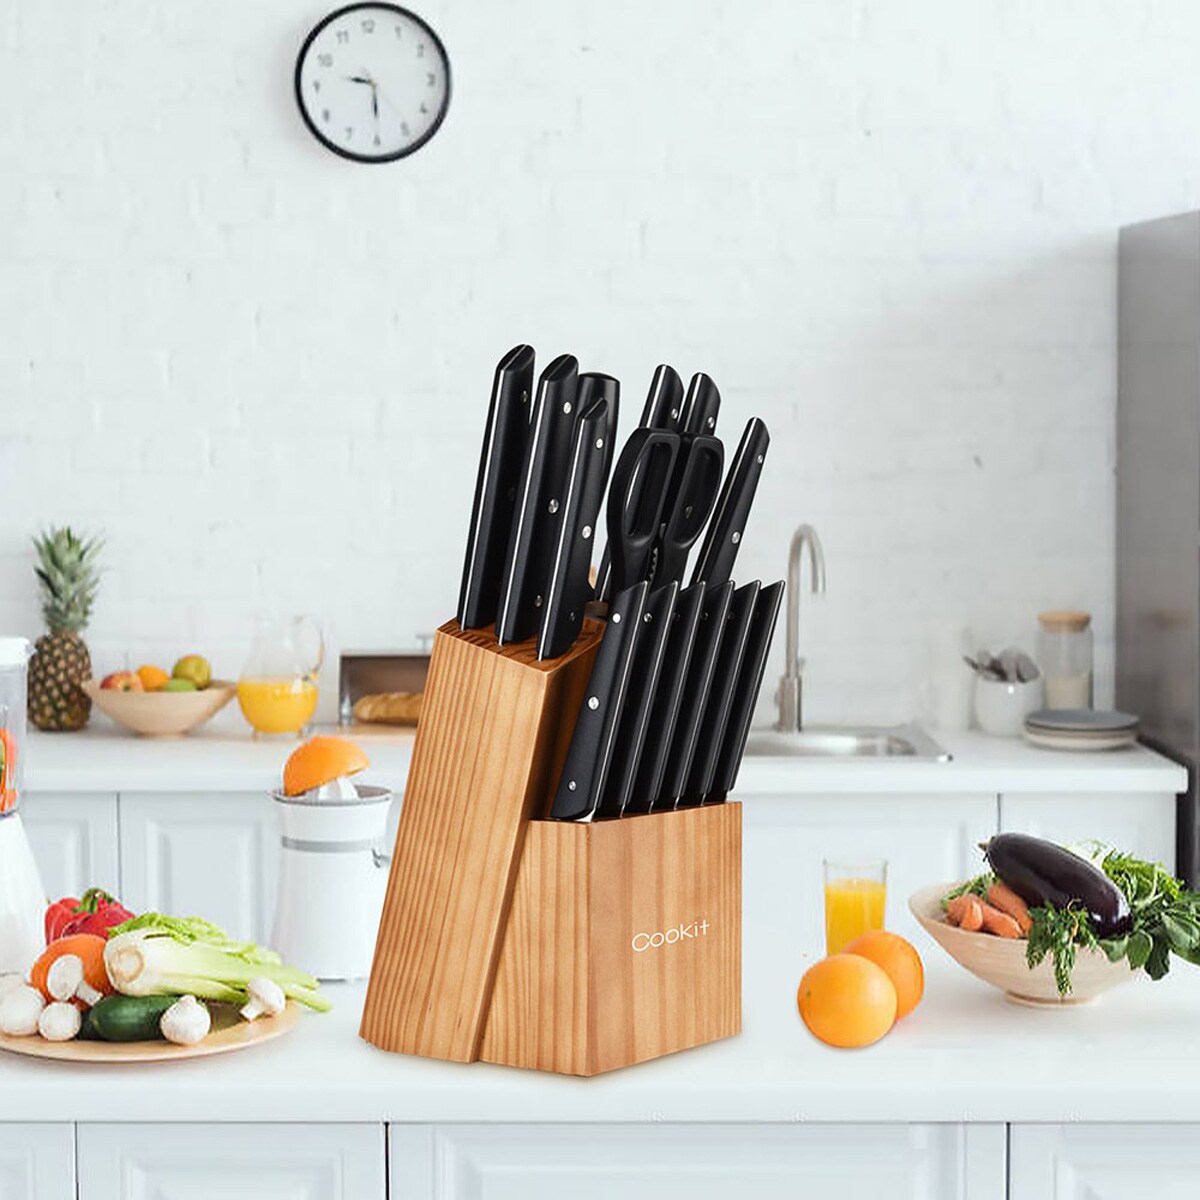 Gibson Shop the Gibson Chef's Better Basics 9-Piece Utensil Set - Black  Kitchen Gadget Set with Round Wire Caddy. Heat Resistant, Dishwasher Safe,  Convenient Storage. in the Kitchen Tools department at